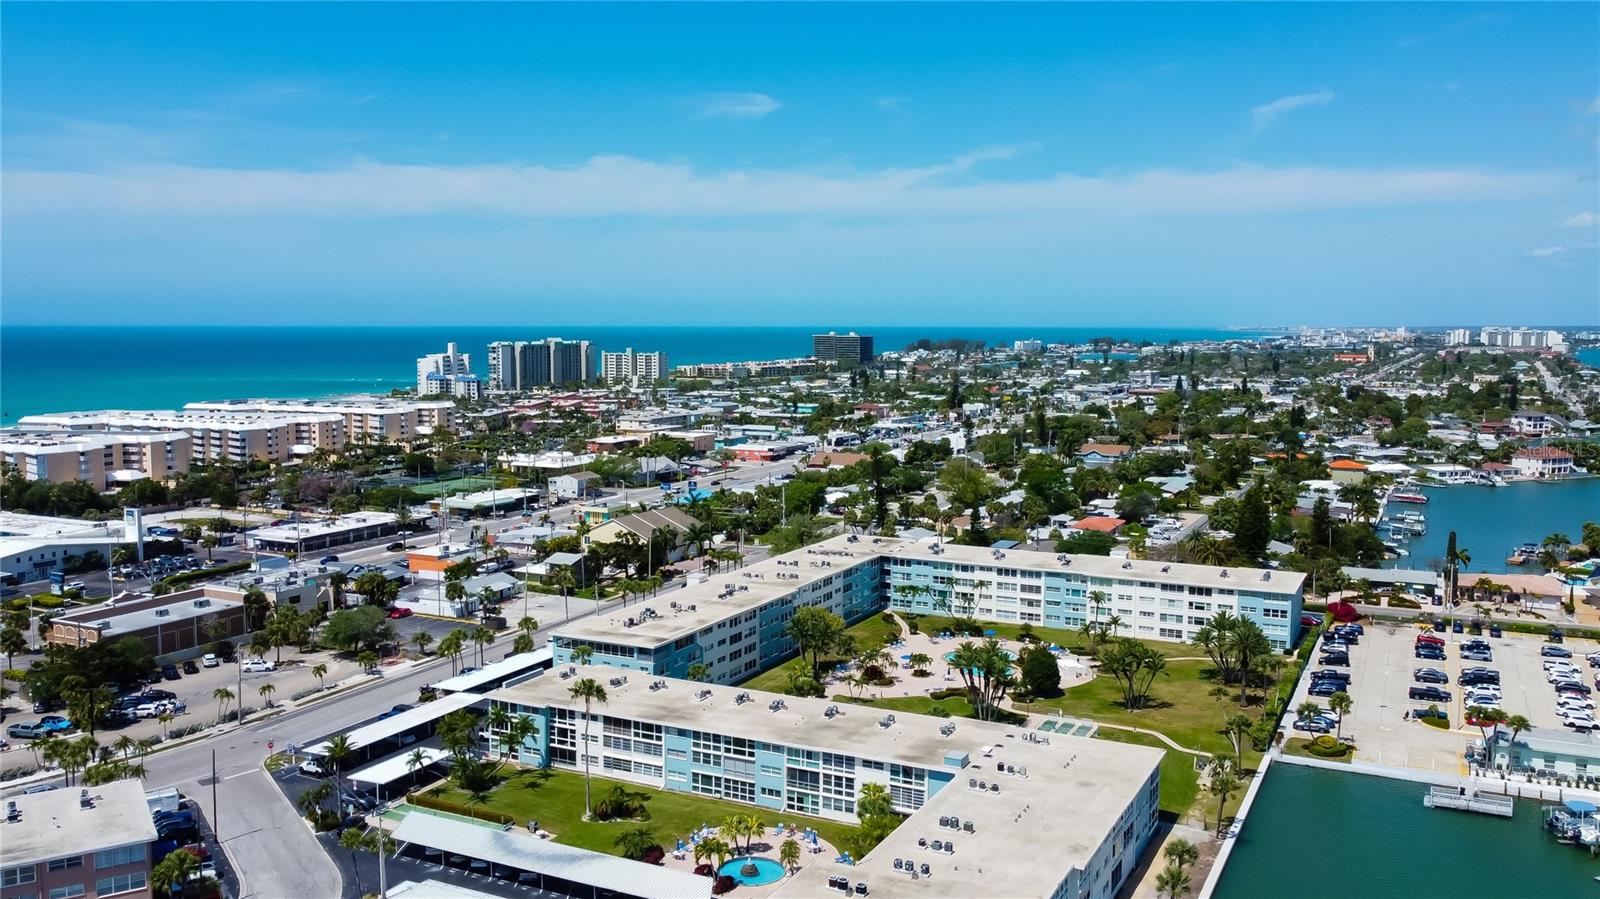 Centrally located in St Pete Beach